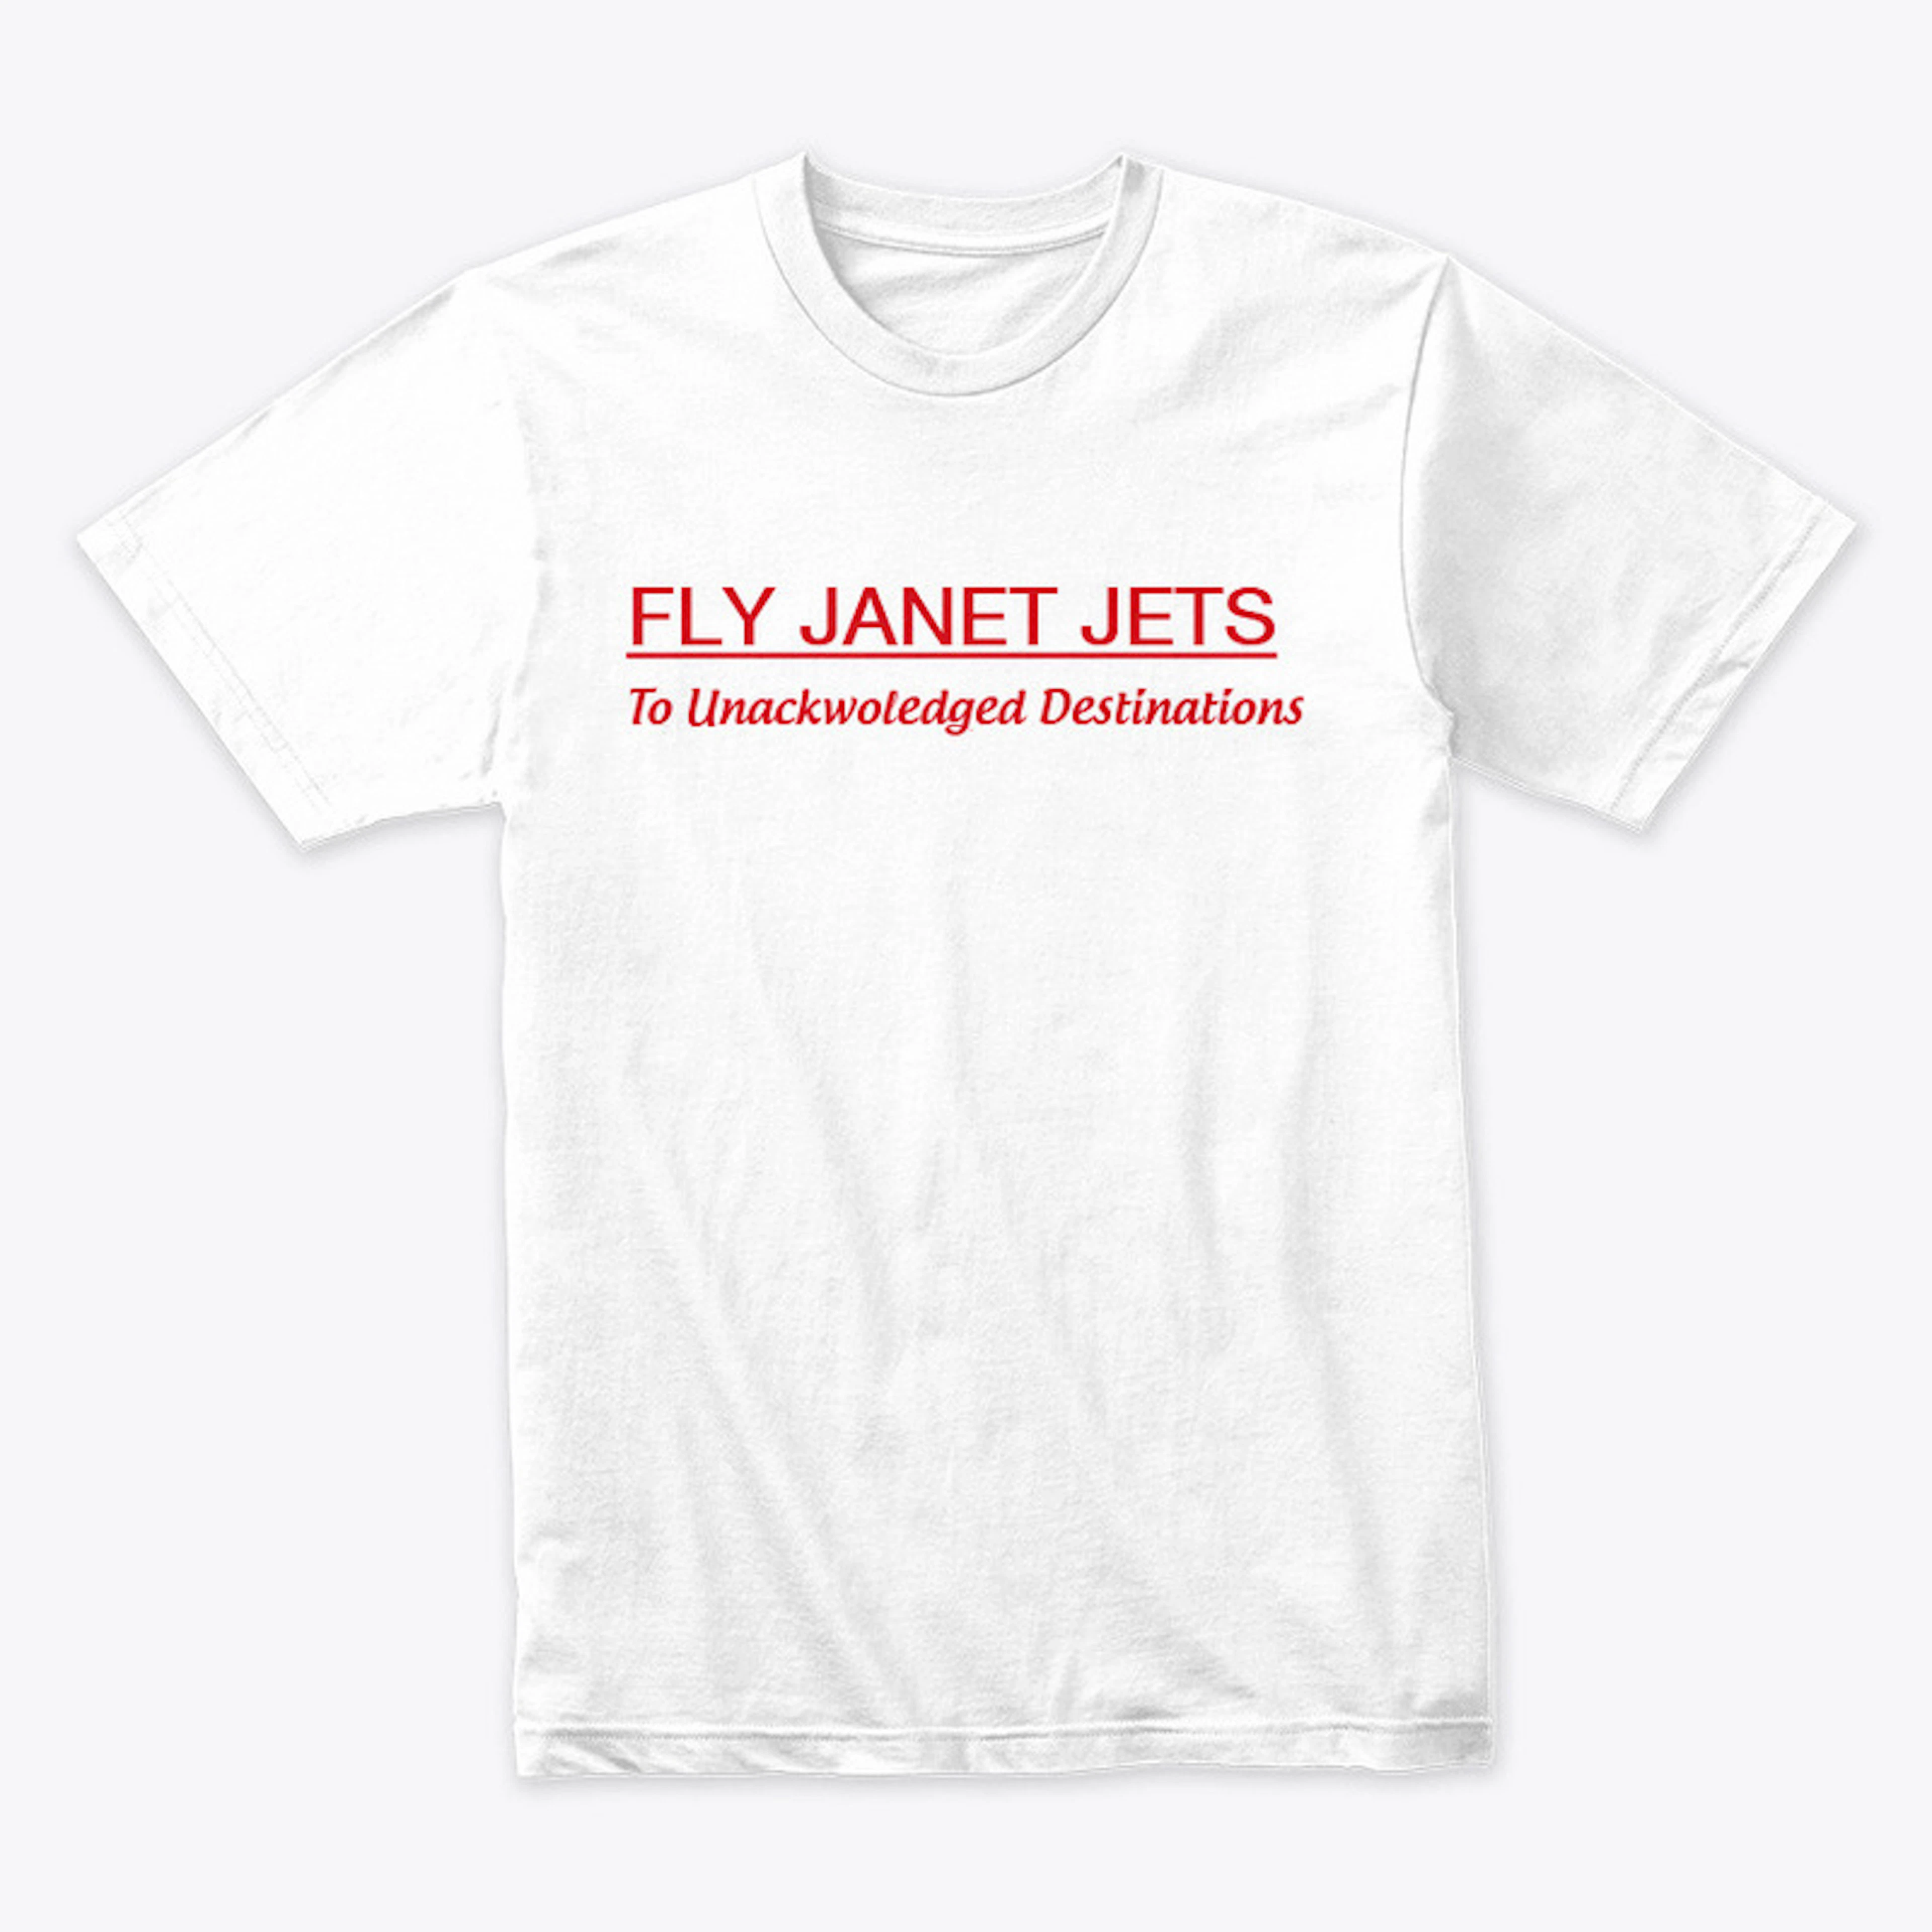 Fly Janet Jets